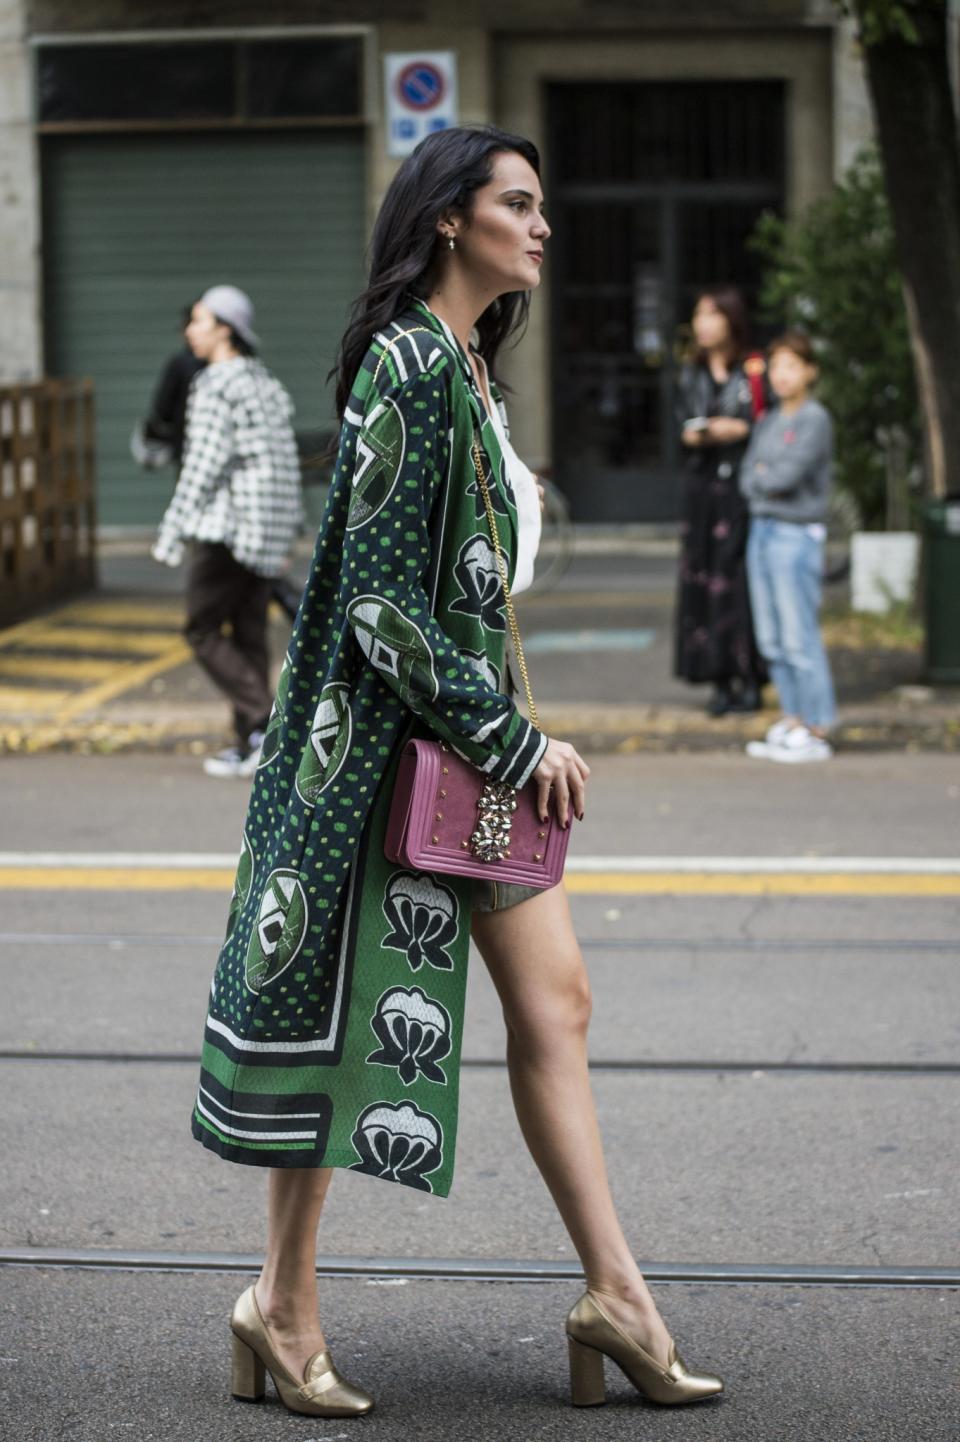 This printed robe is making us green with envy.